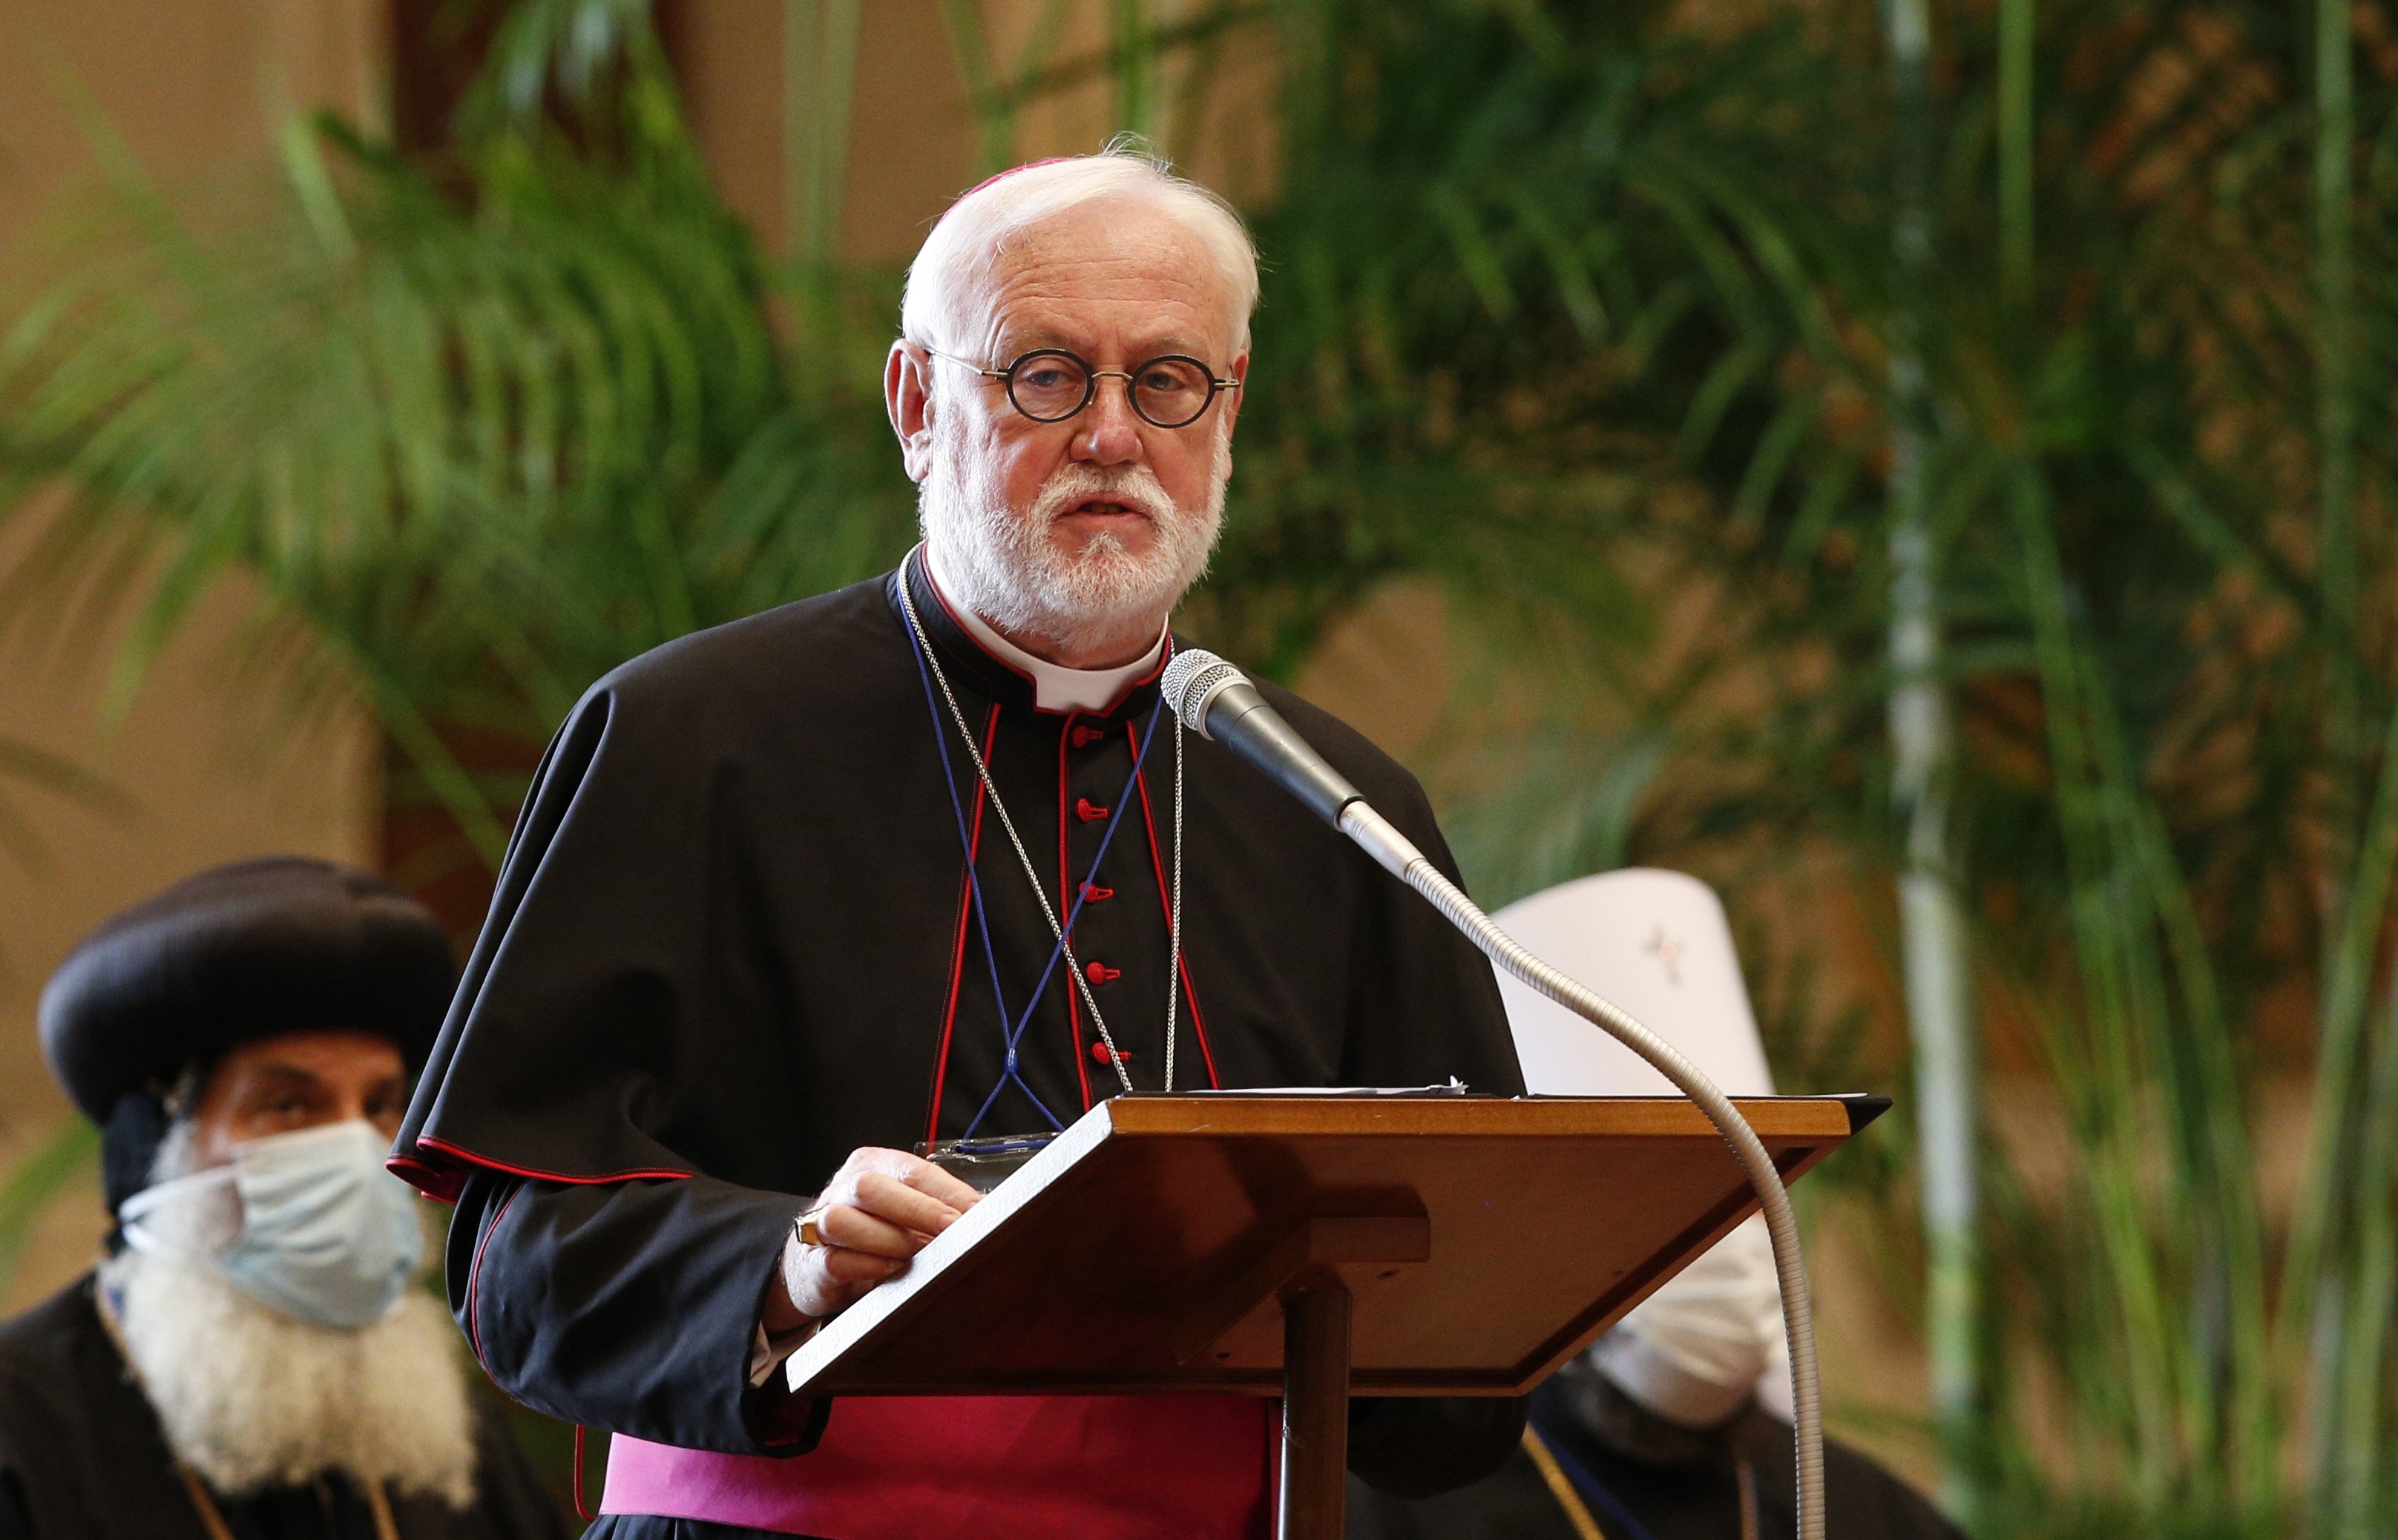 Archbishop Paul Gallagher, Vatican secretary for relations with states, speaks at the meeting, "Faith and Science: Towards COP26," with Pope Francis and other religious leaders in the Hall of Benedictions at the Vatican Oct. 4, 2021. The following day, Ar